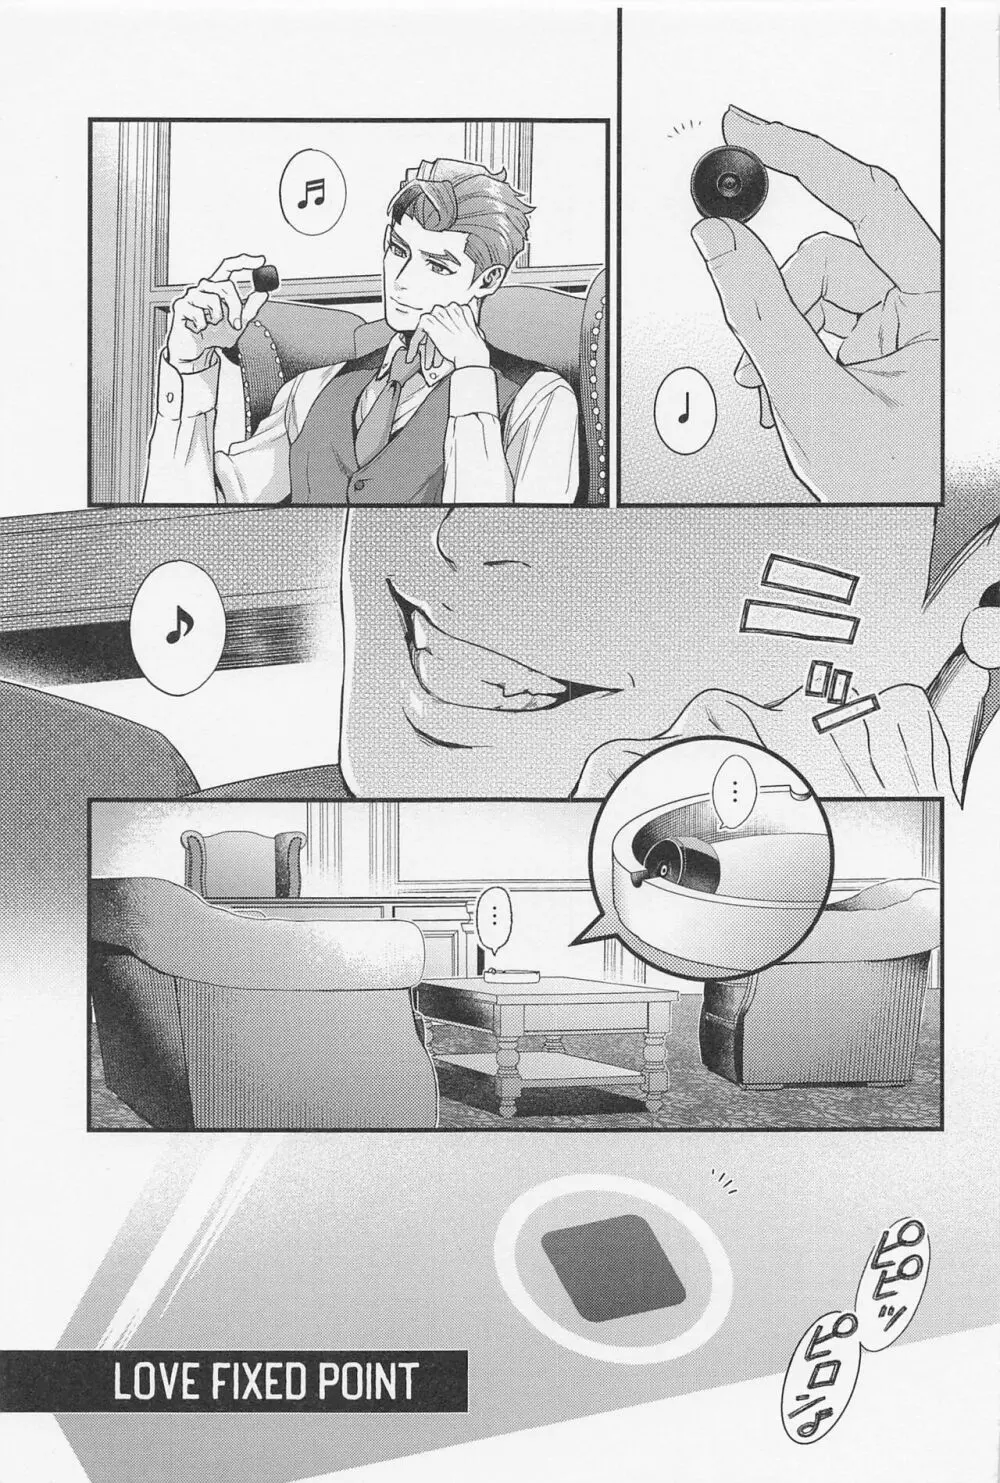 LOVE FIXED POINT - 愛の定点観測 - page4